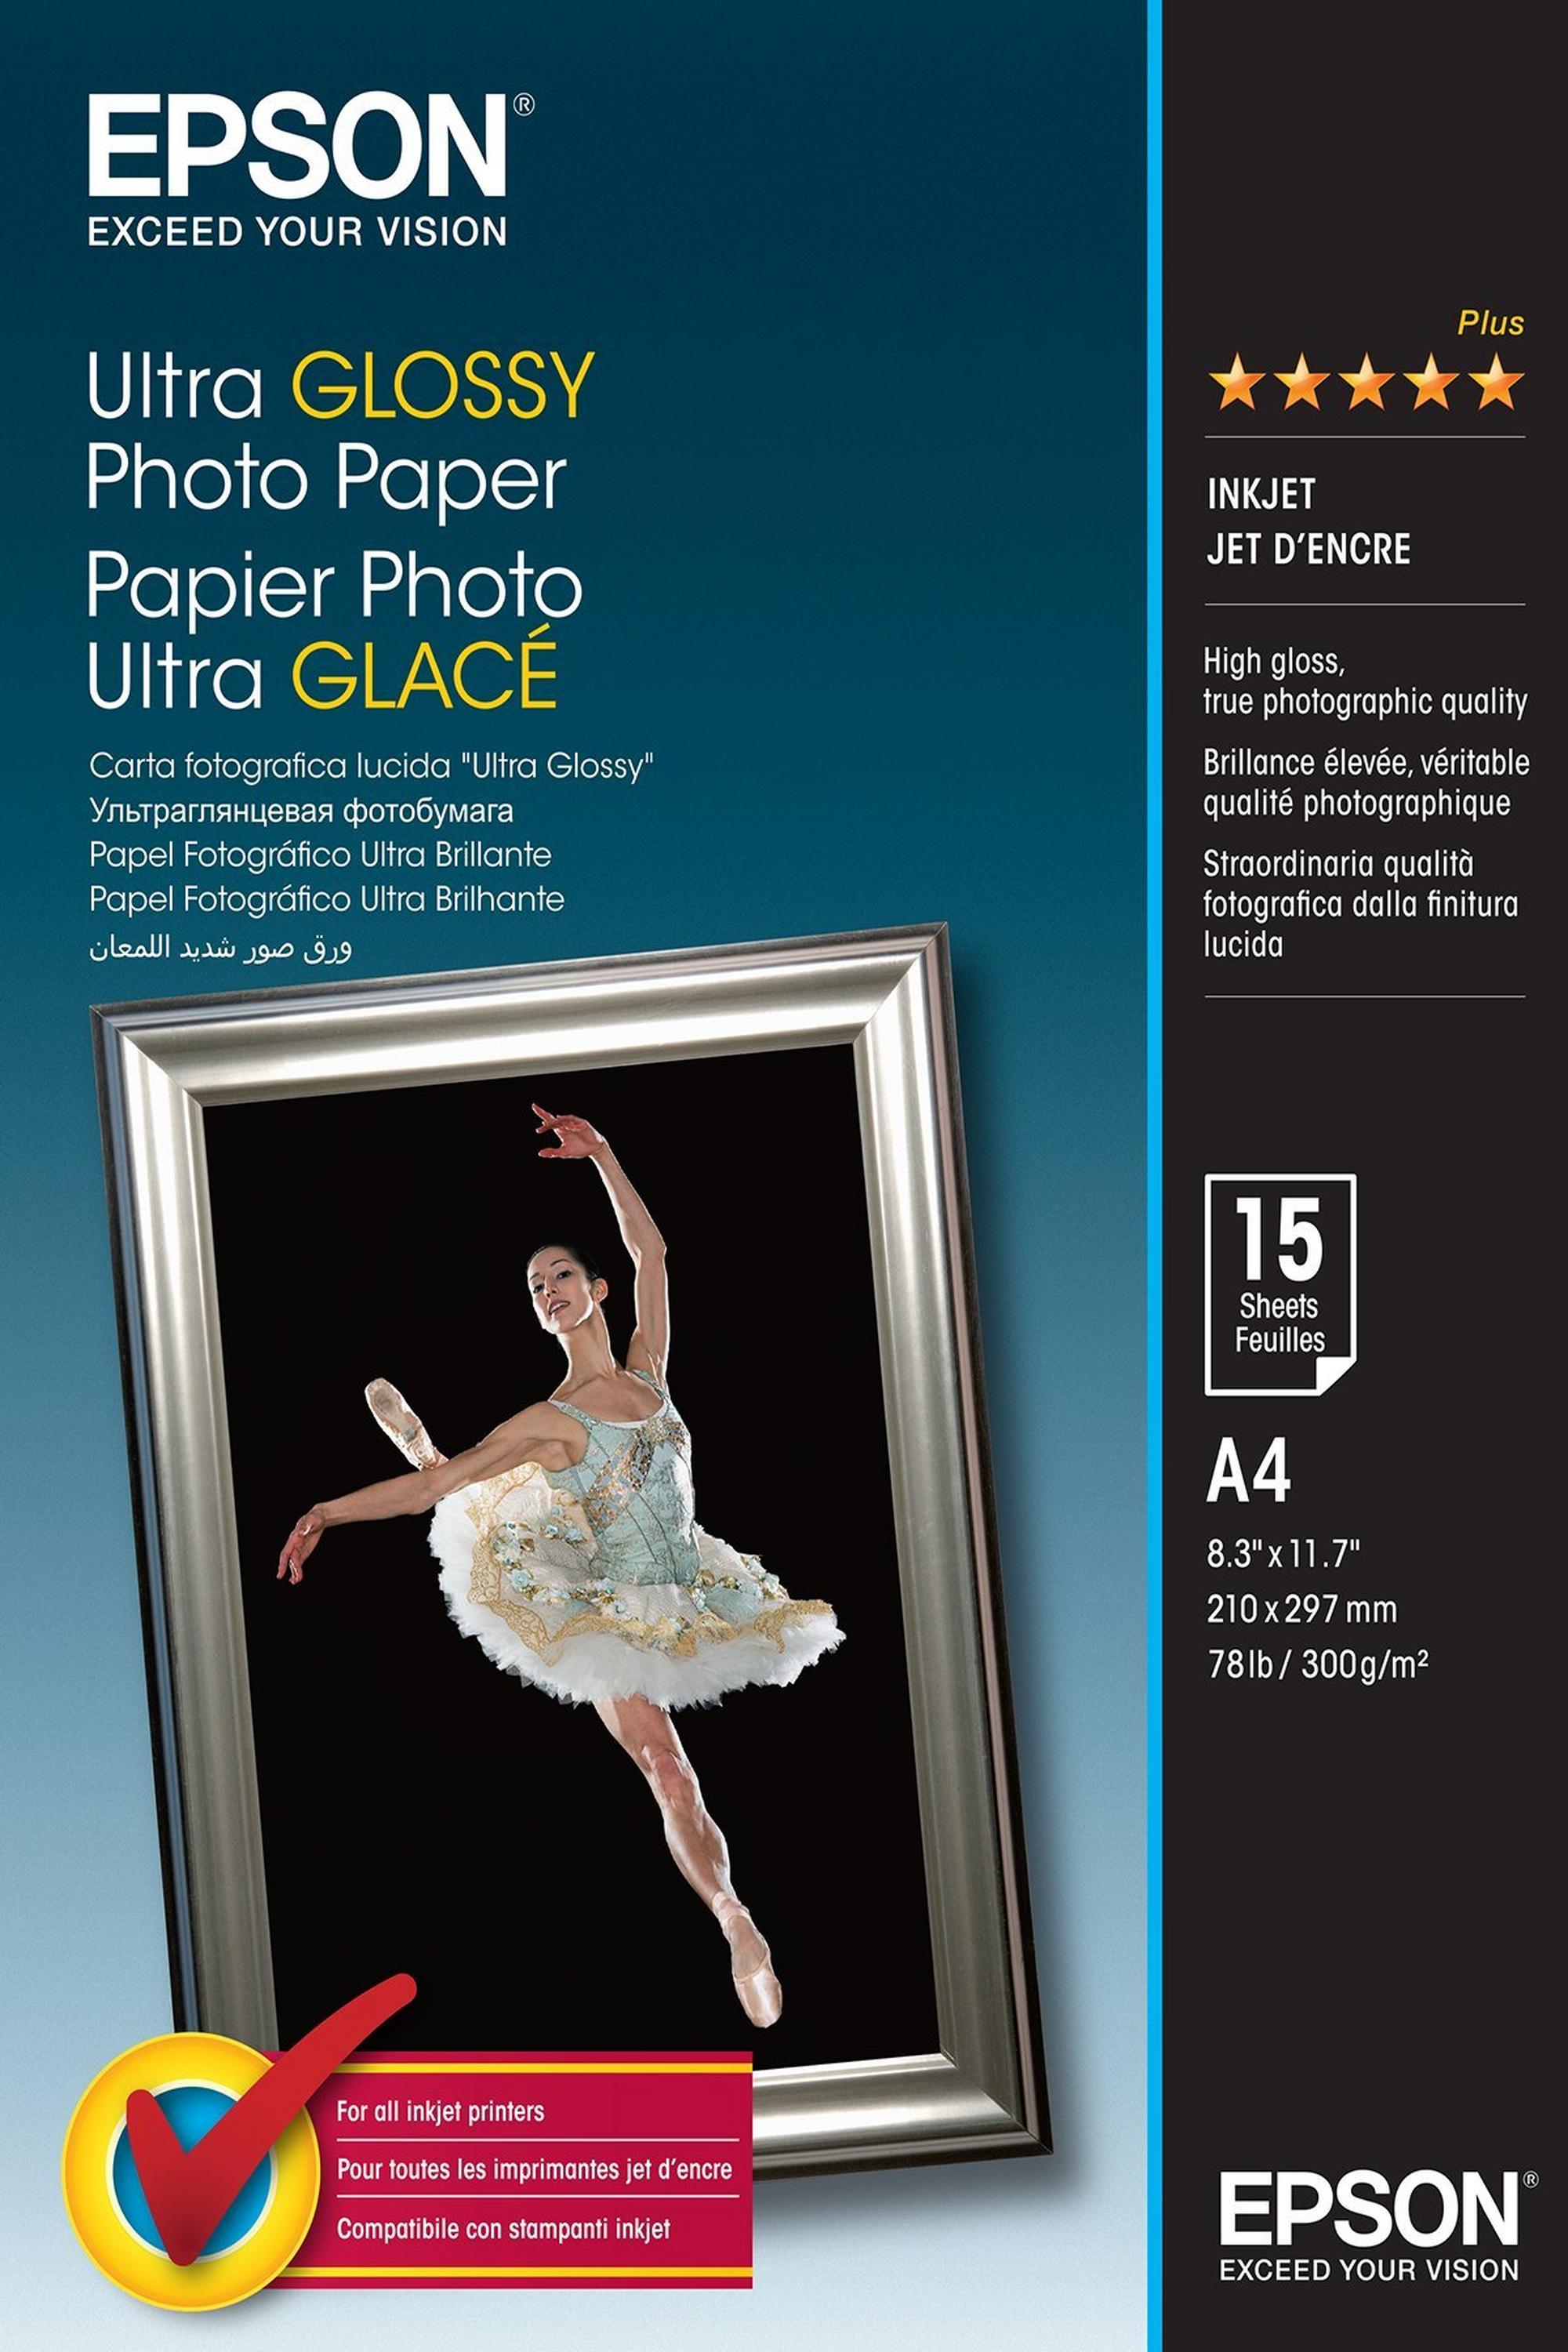 Epson Ultra Glossy Photo Paper - A4, 300g/m² - 15 Sheets